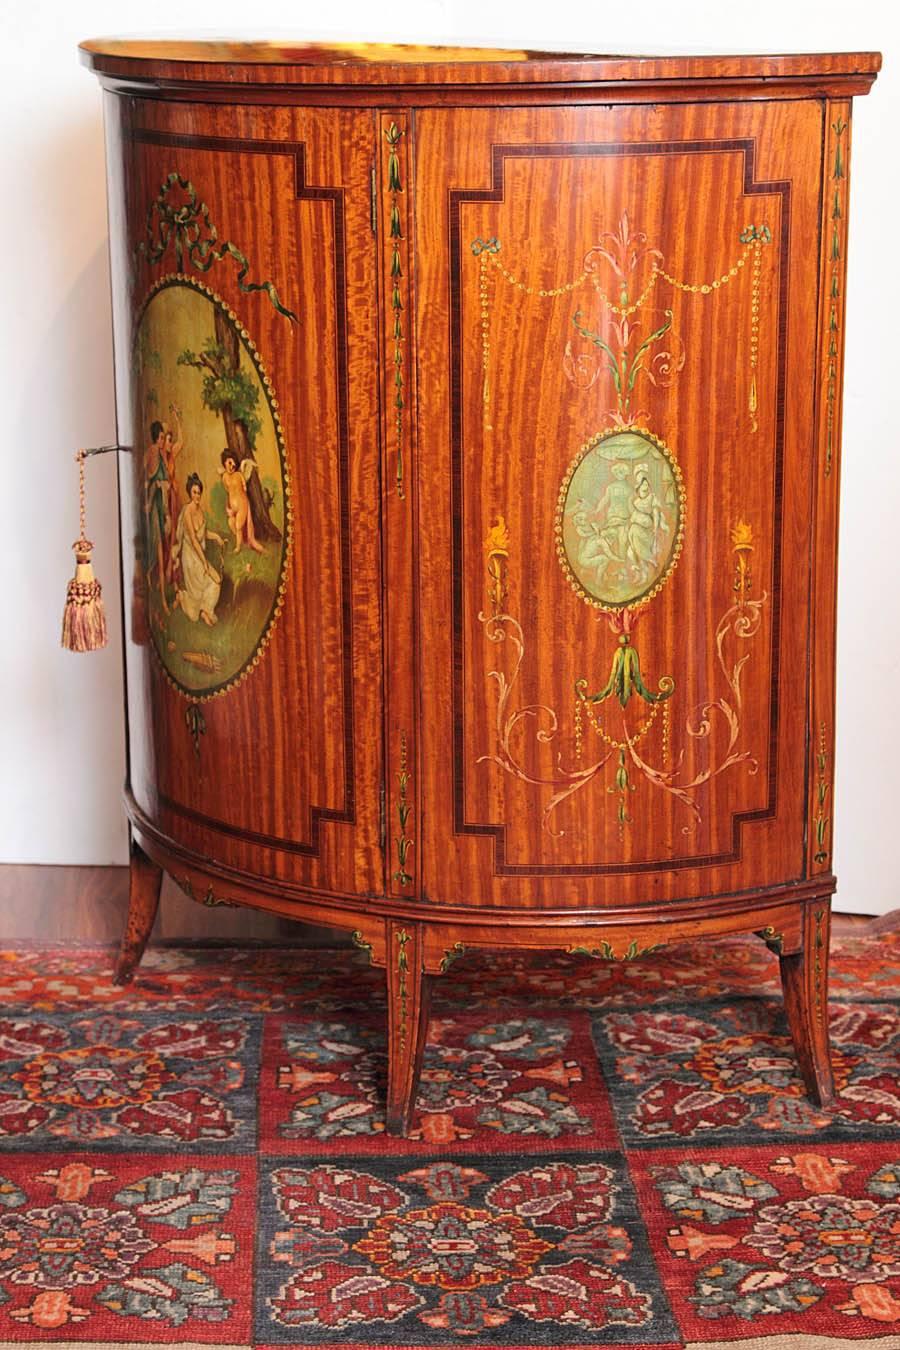 19th c Regency period satinwood demilune. hand painted scenes in the style of Angelica Kaufman